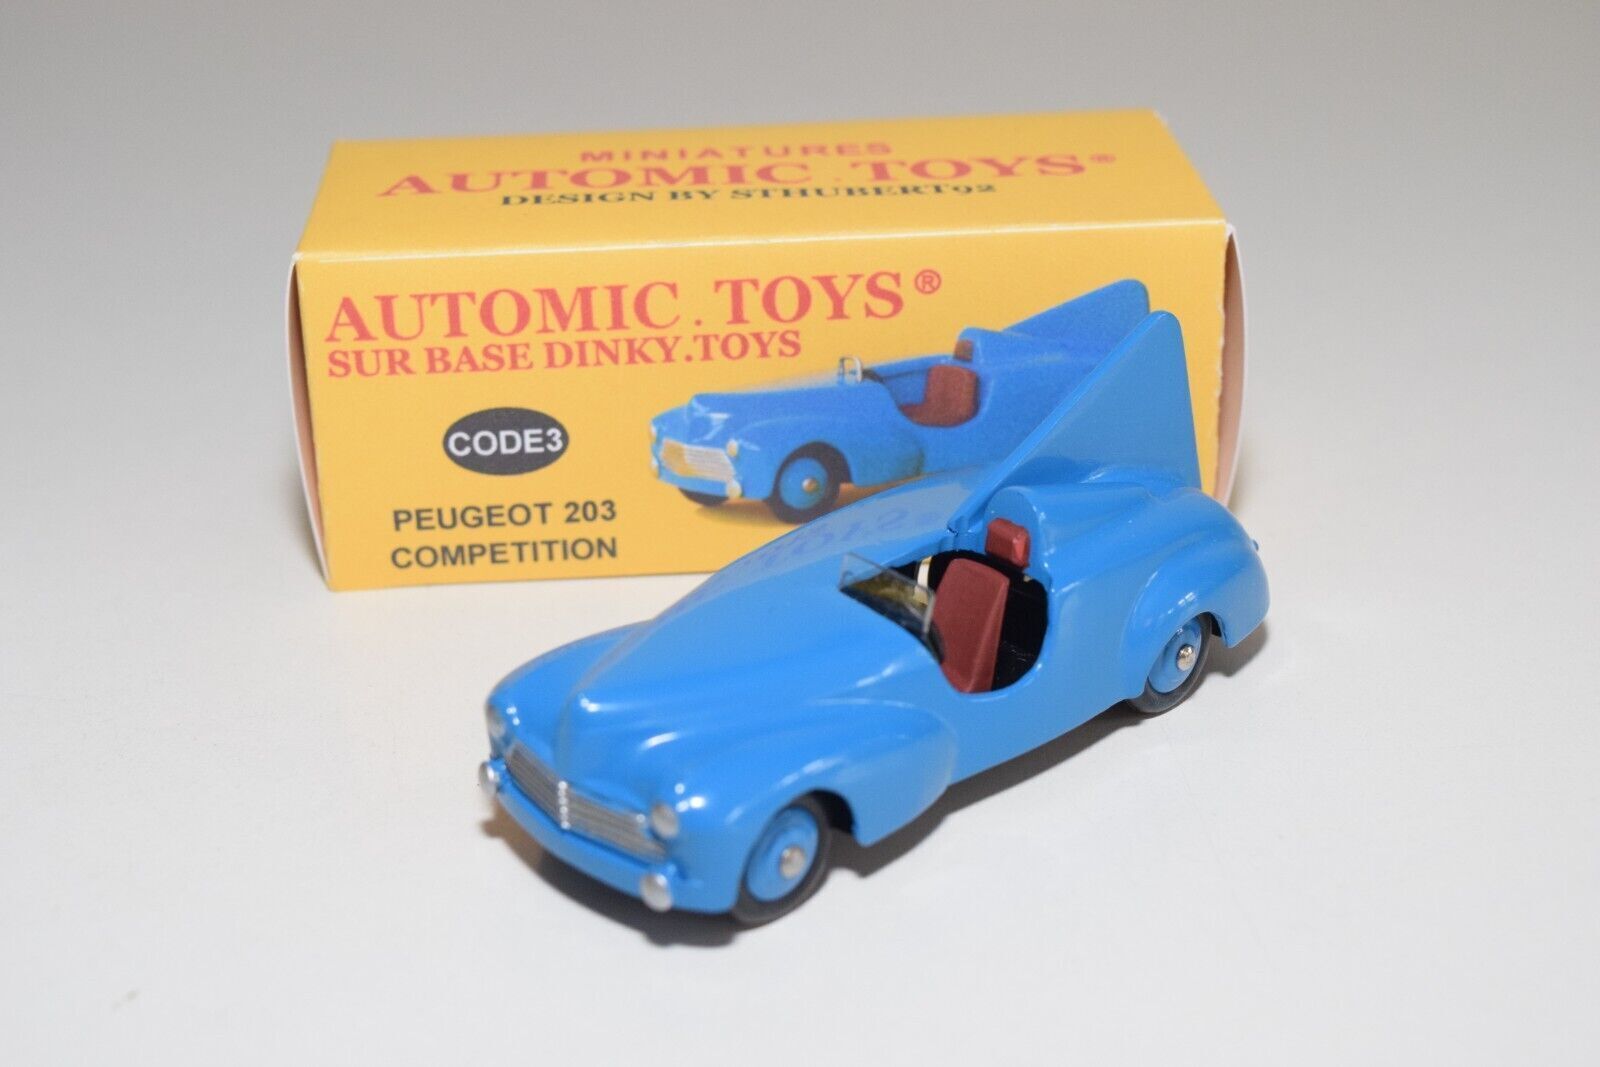 A40 1:43 STHUBERT92 AUTOMIC TOYS 24R PEUGEOT 203 COMPETITION BLUE MIB RARE